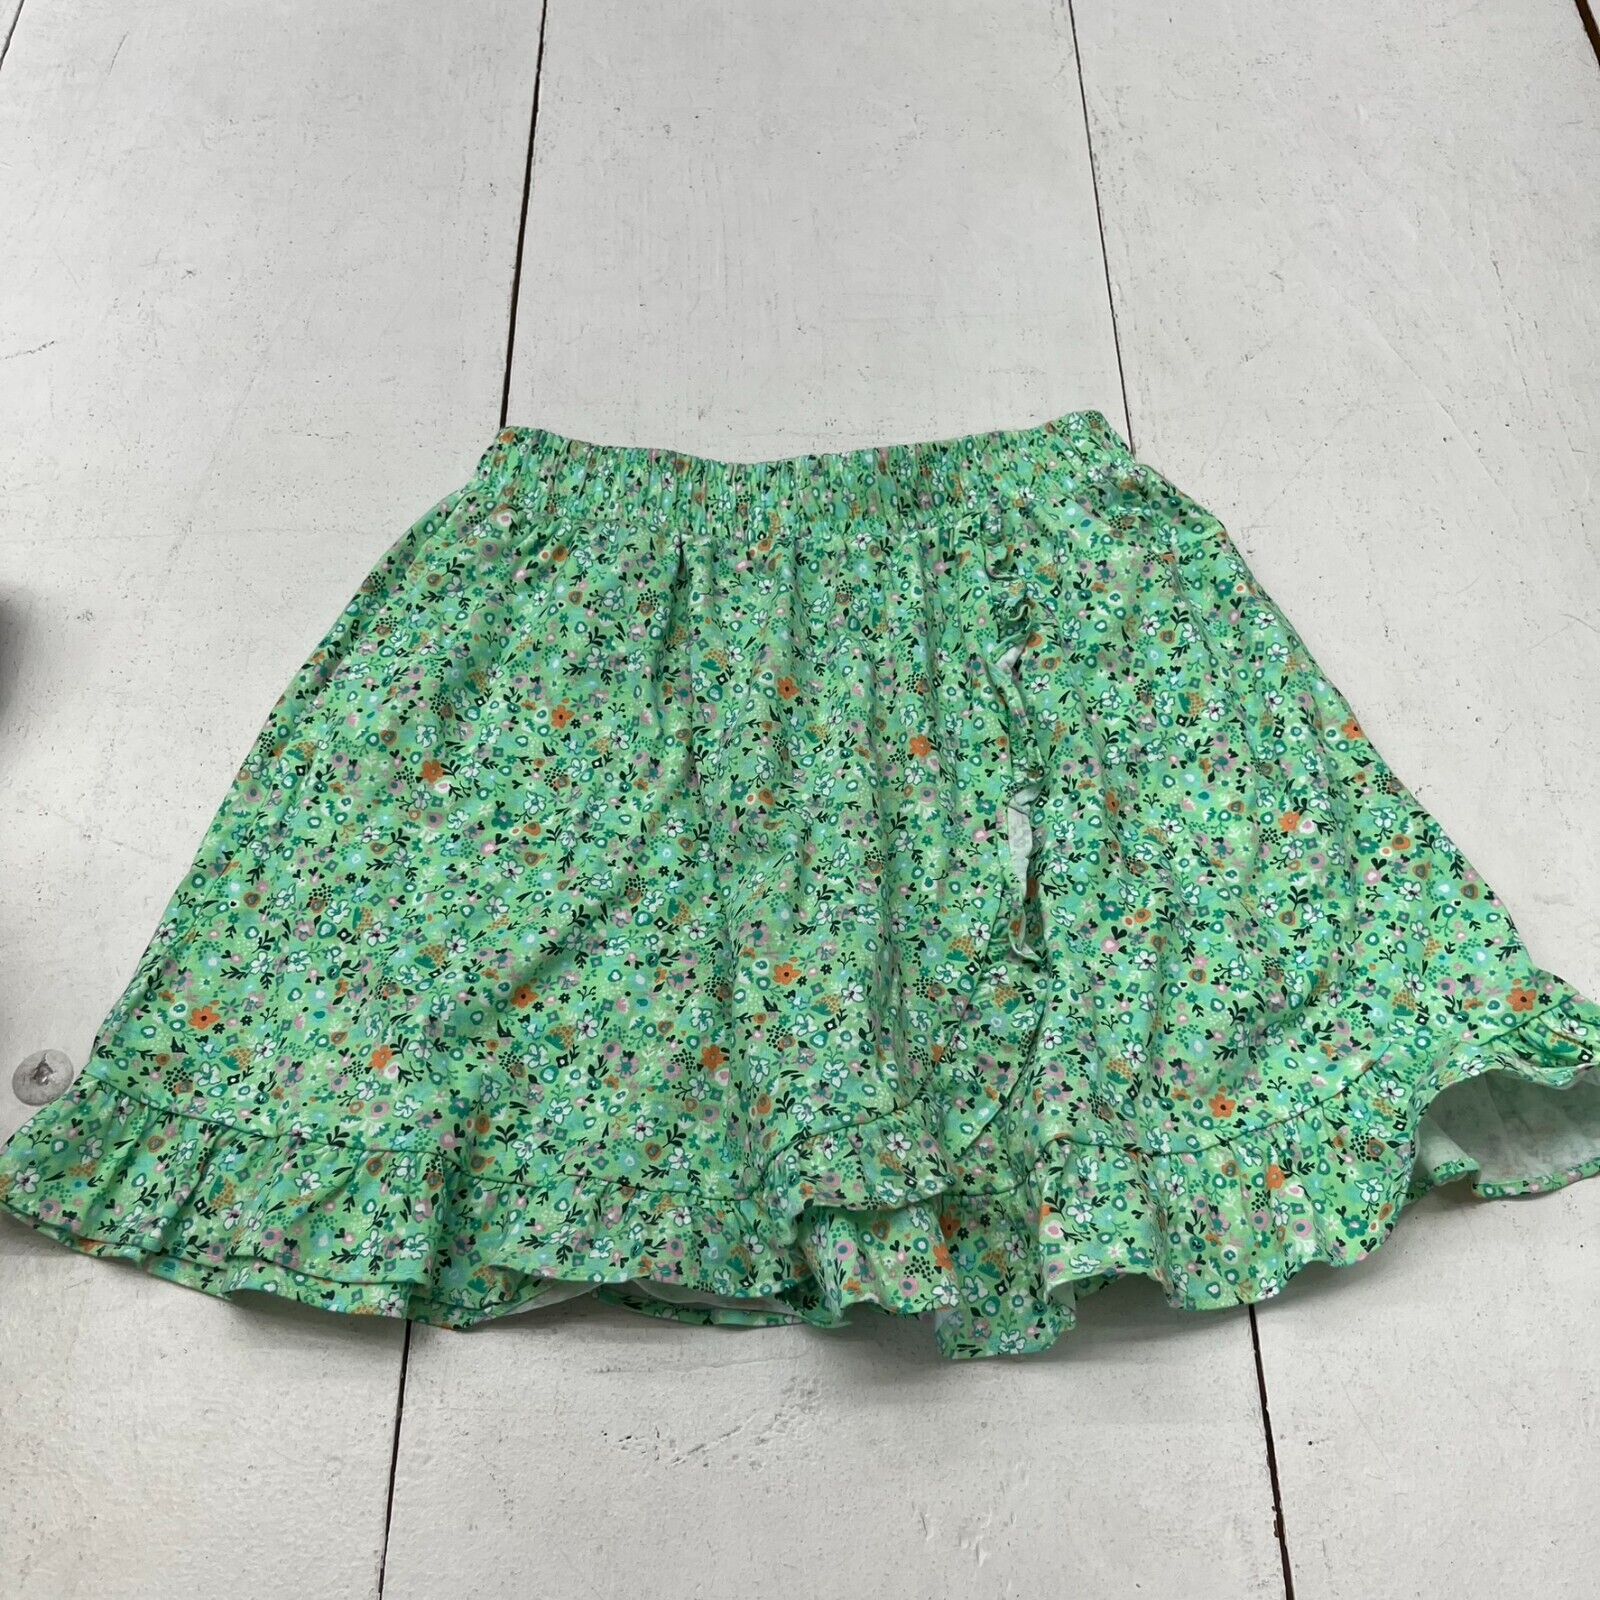 Amazon Essentials Green Floral Print Skirt Girls Size Large (10) NEW